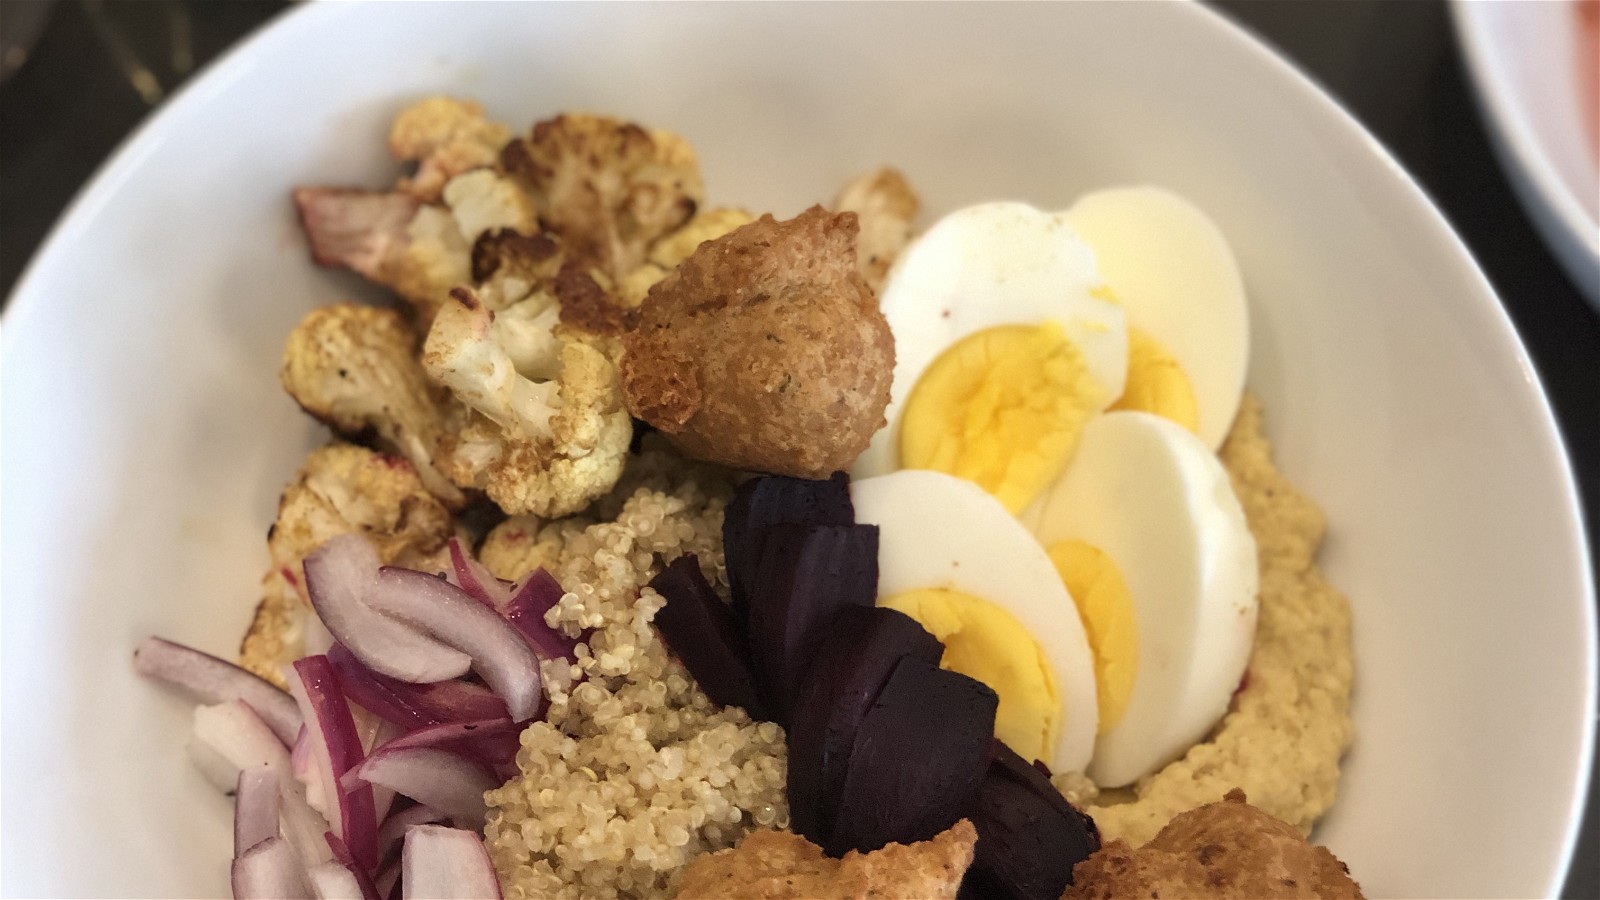 Image of Hummus Bowl with Vegetables and Falafel